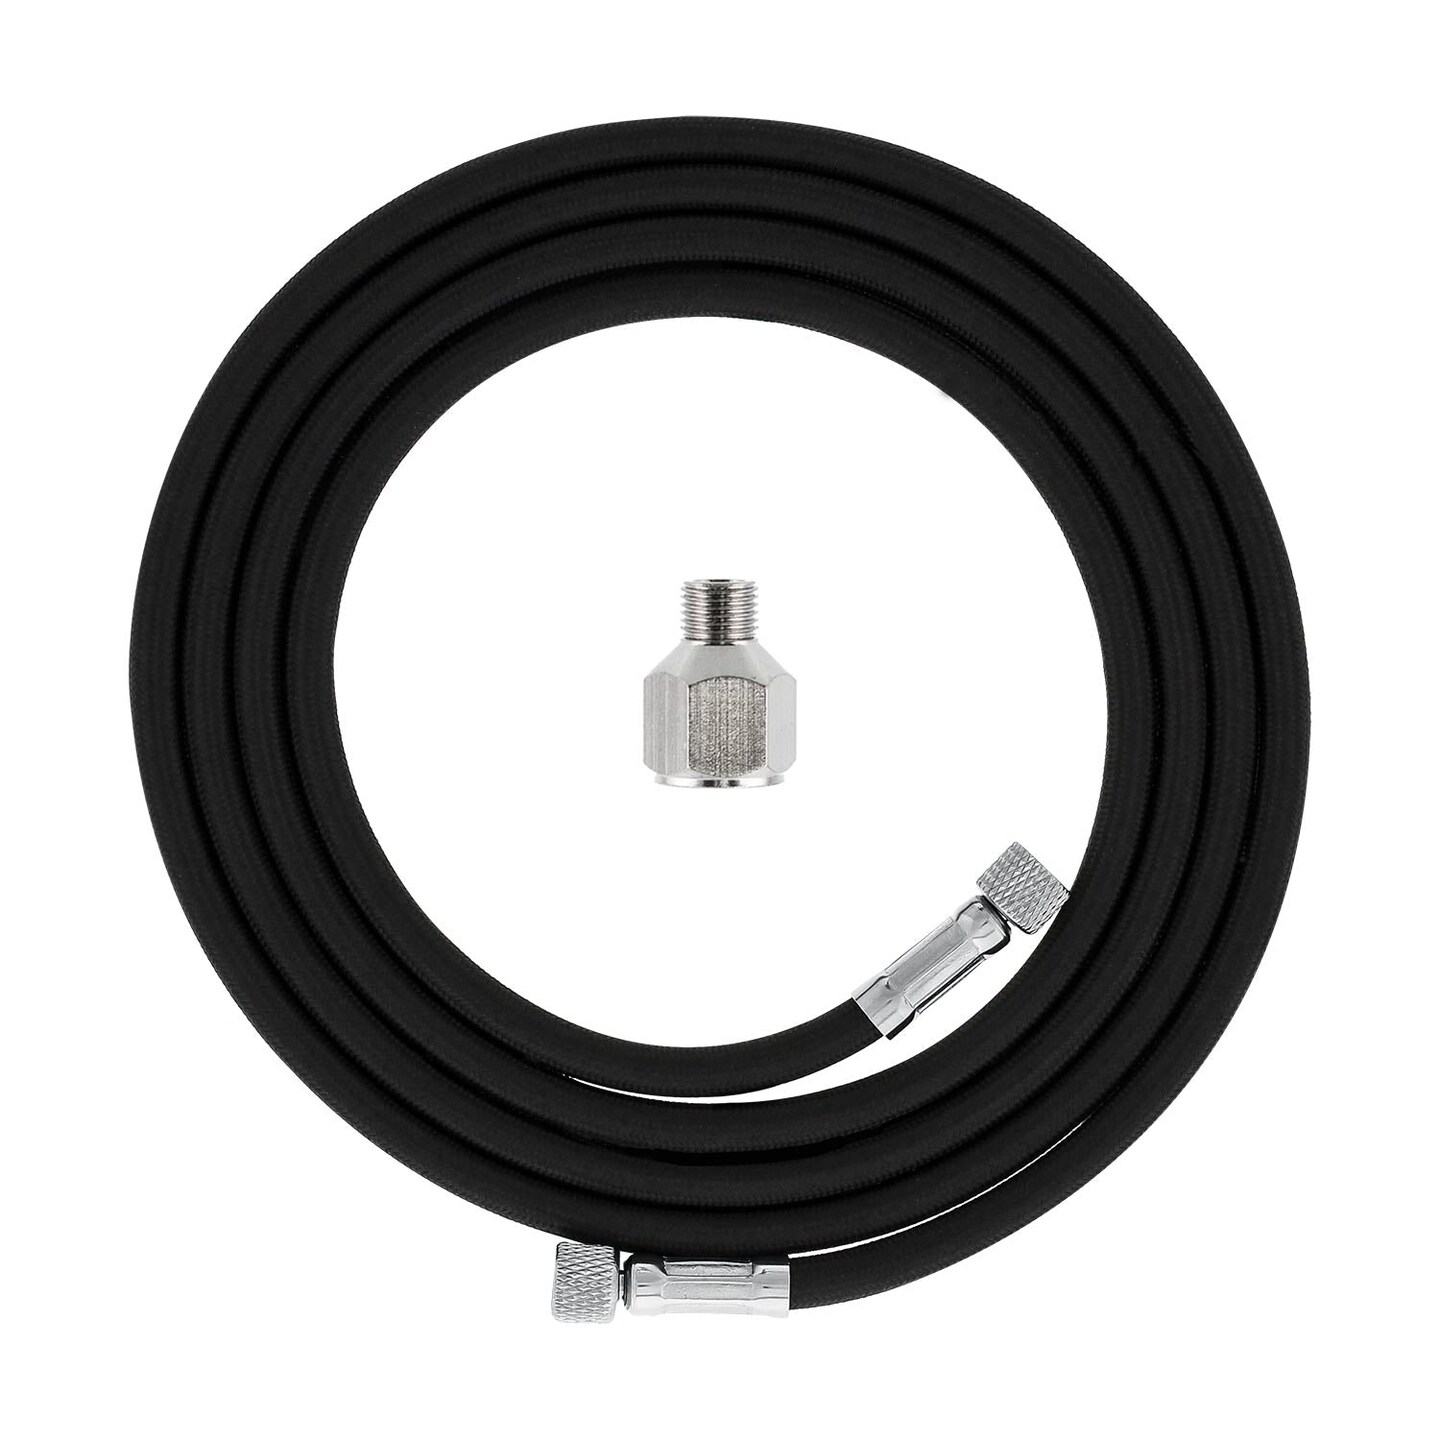 Premium 6 Foot Nylon Braided Airbrush Hose with 1/8 BSP Size Fittings plus  a 1/4 BSP Female to 1/8 BSP Male Fitting Conversion Adapter